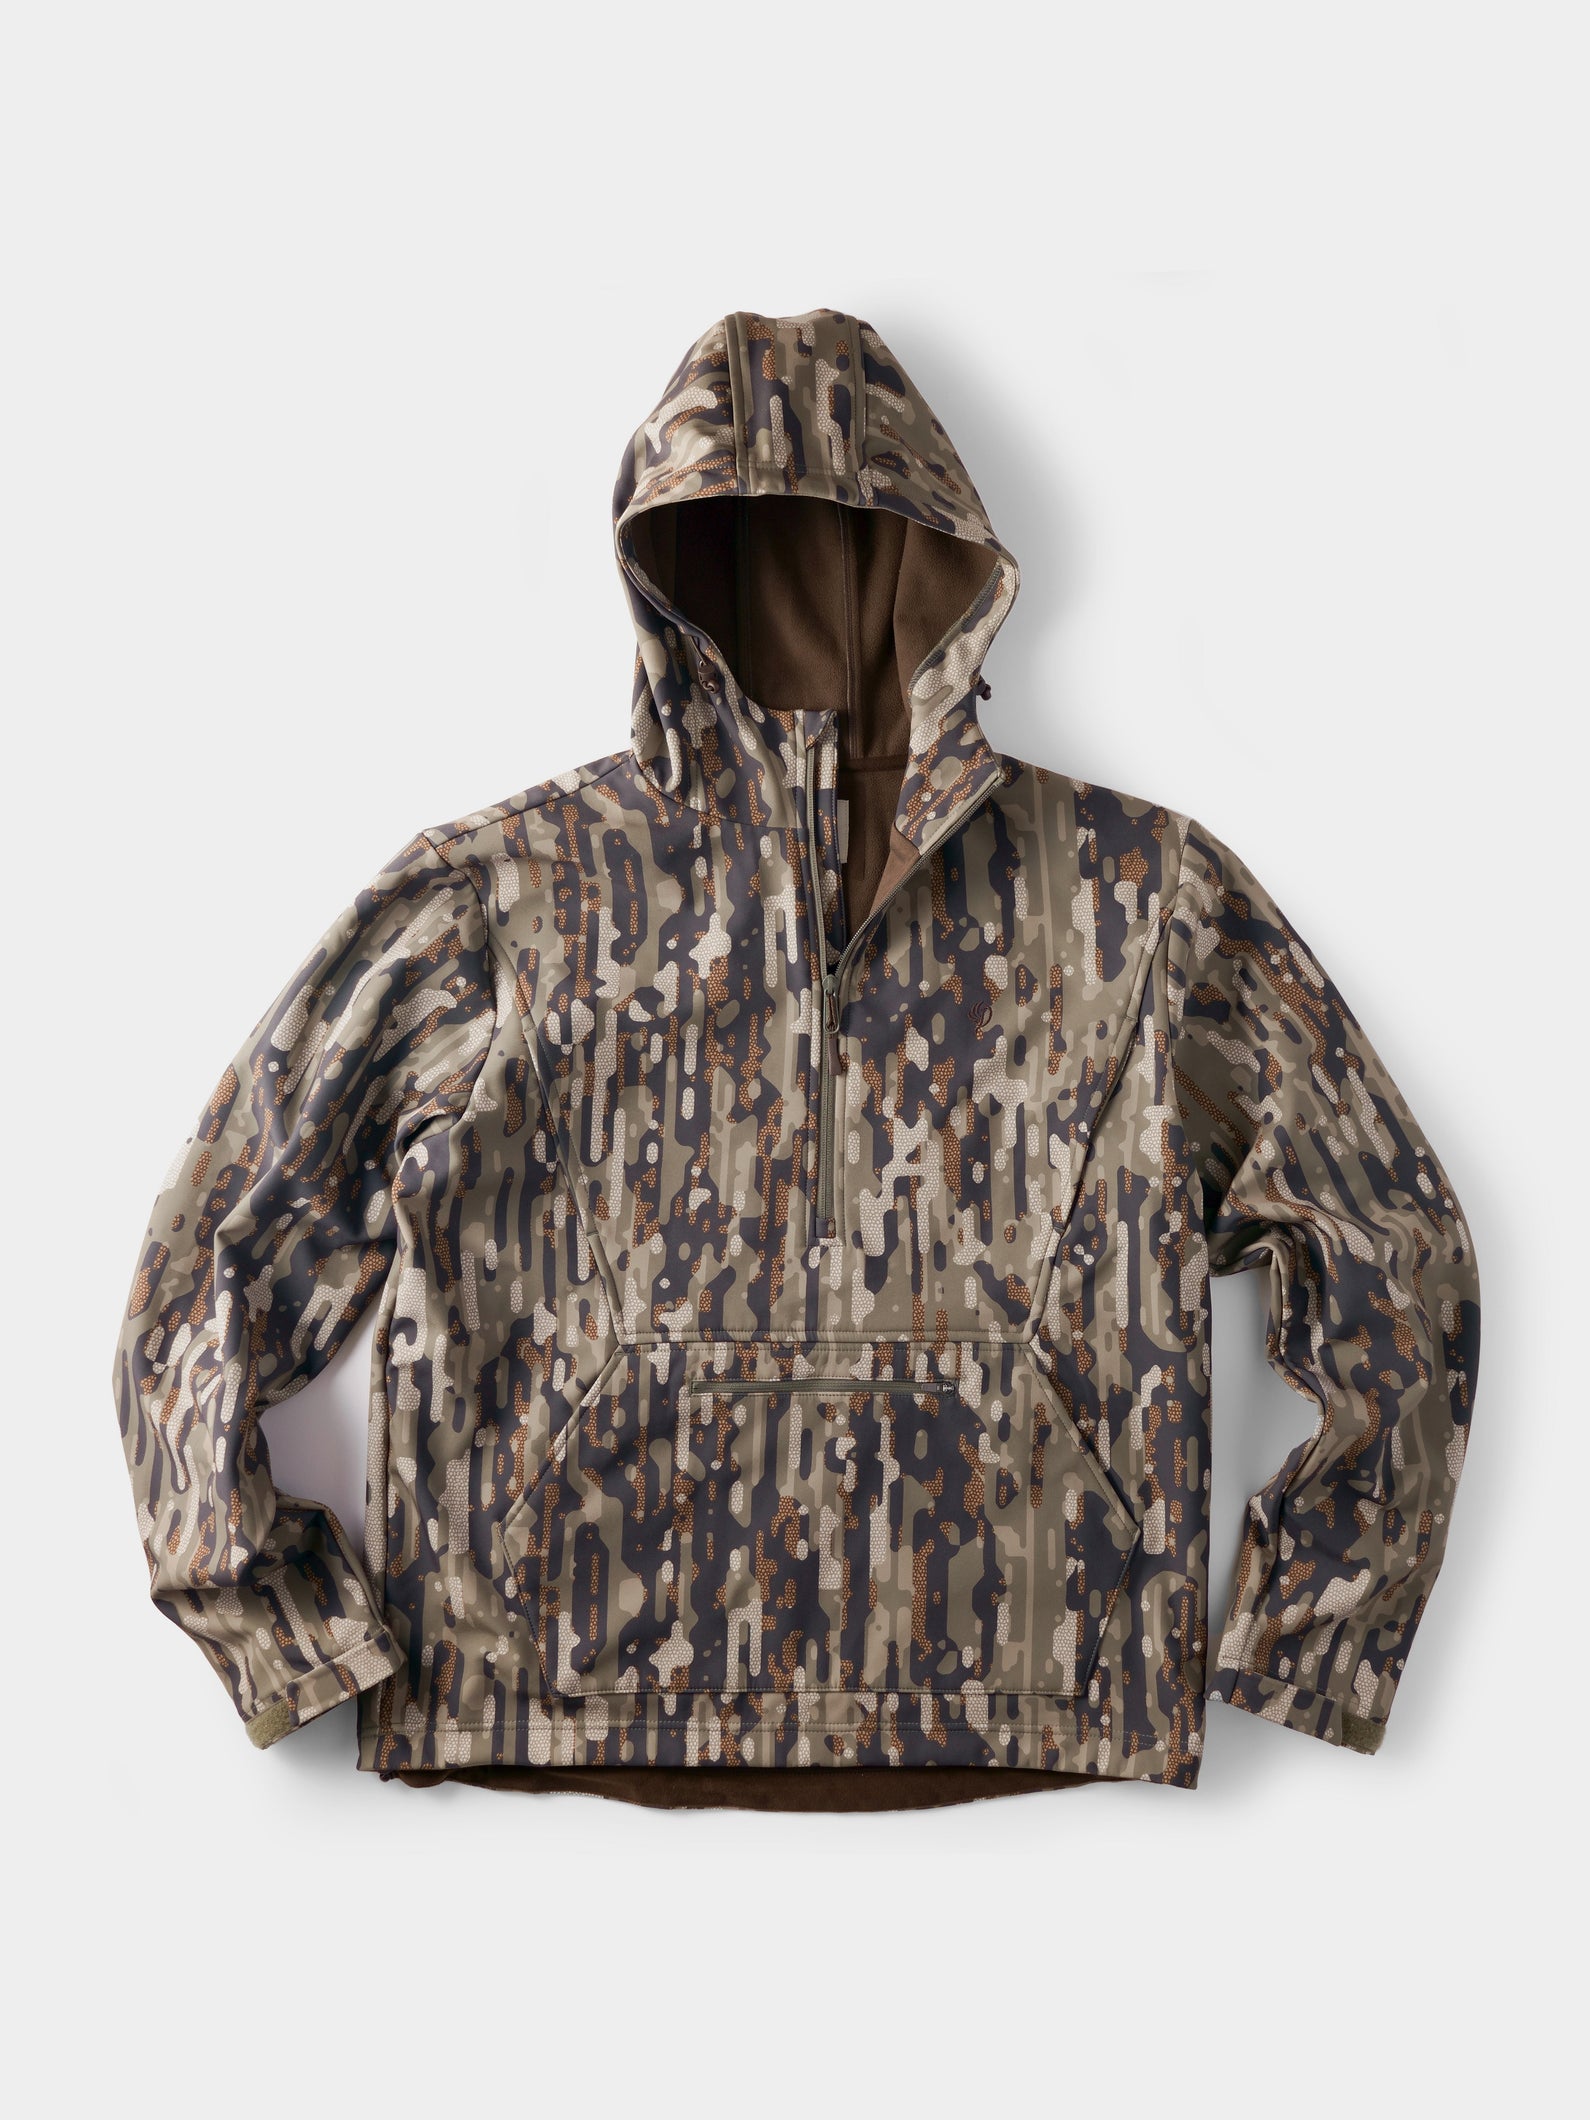 Contact Softshell Hoodie - Woodland